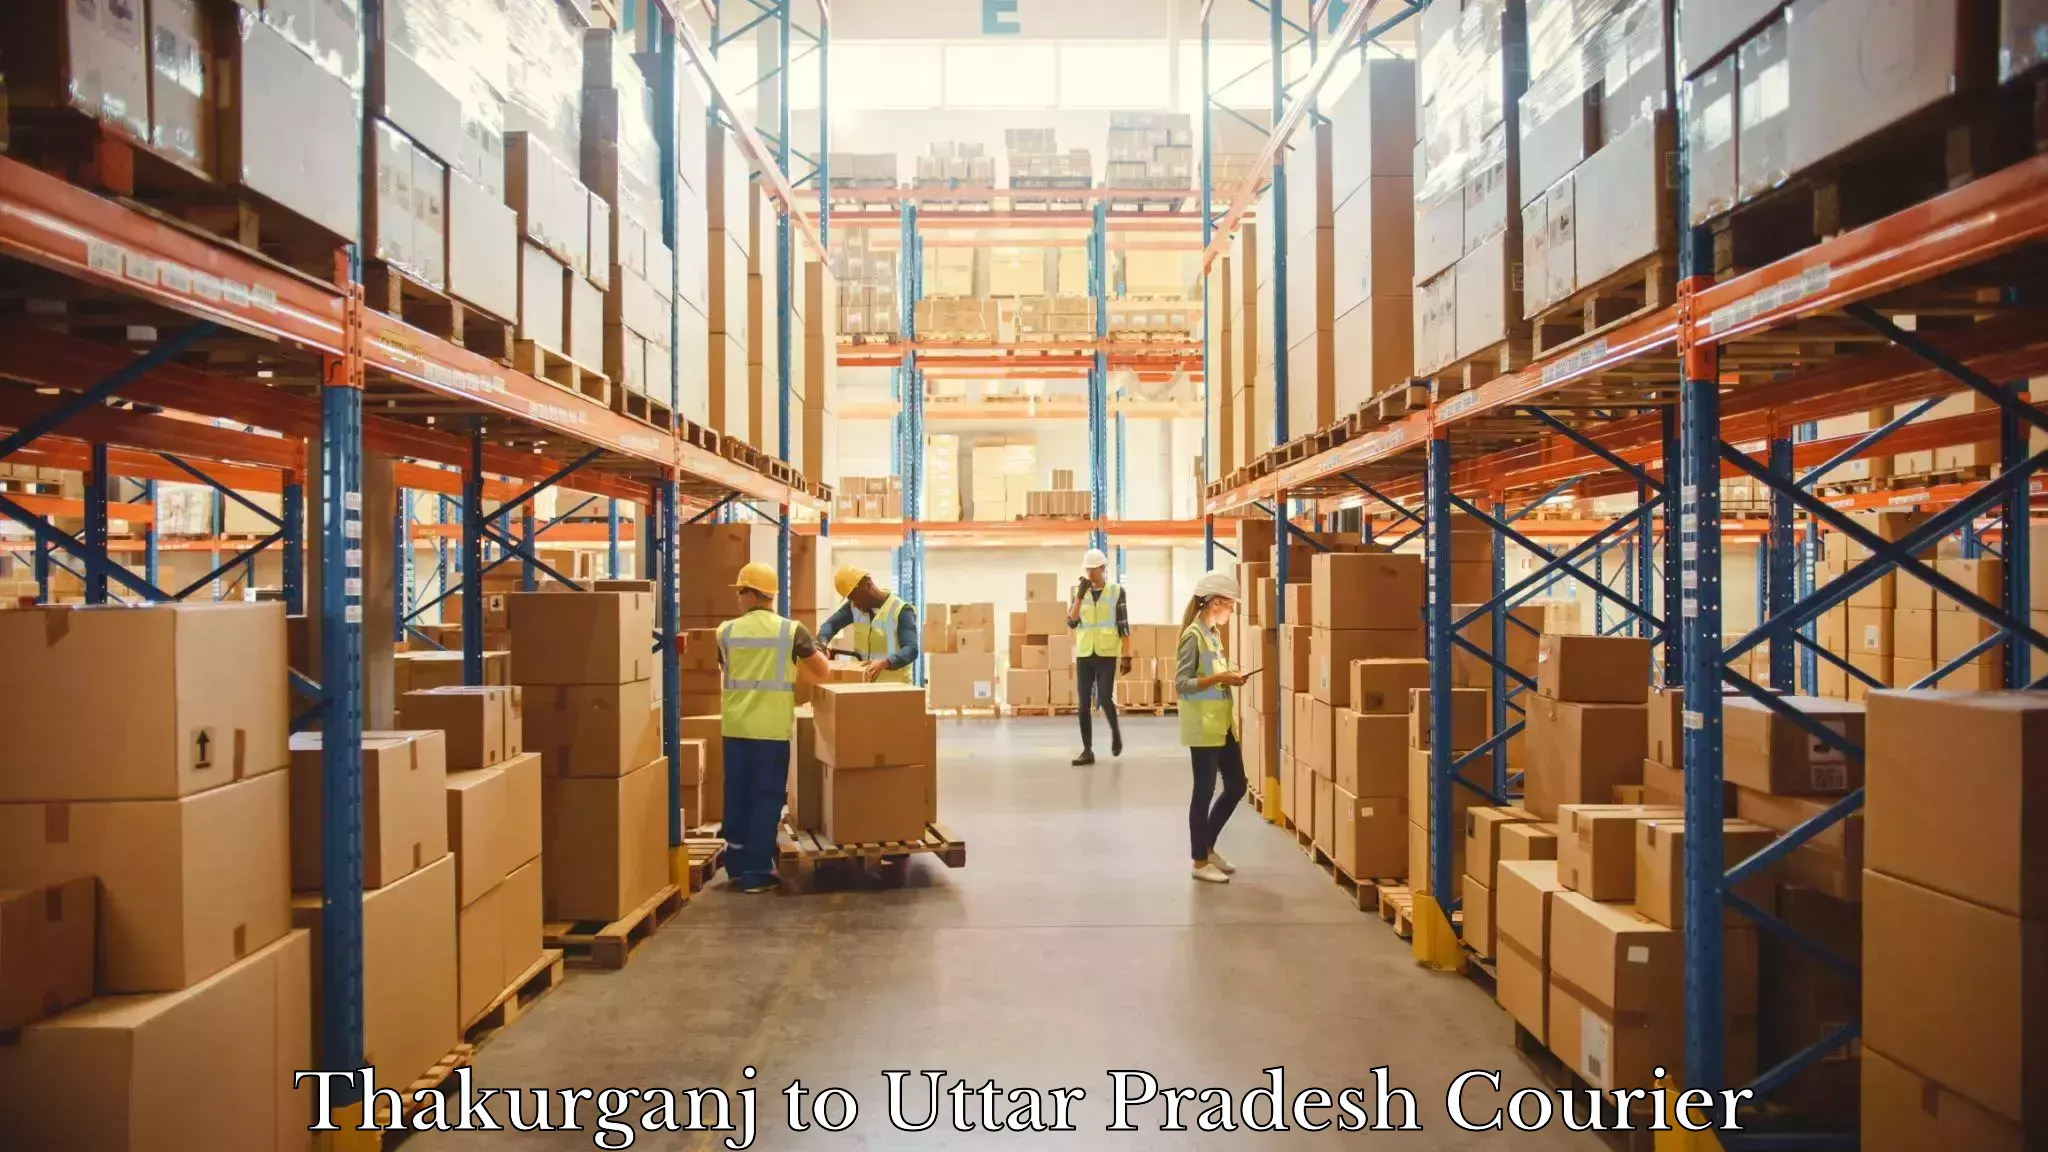 Express delivery solutions Thakurganj to Aligarh